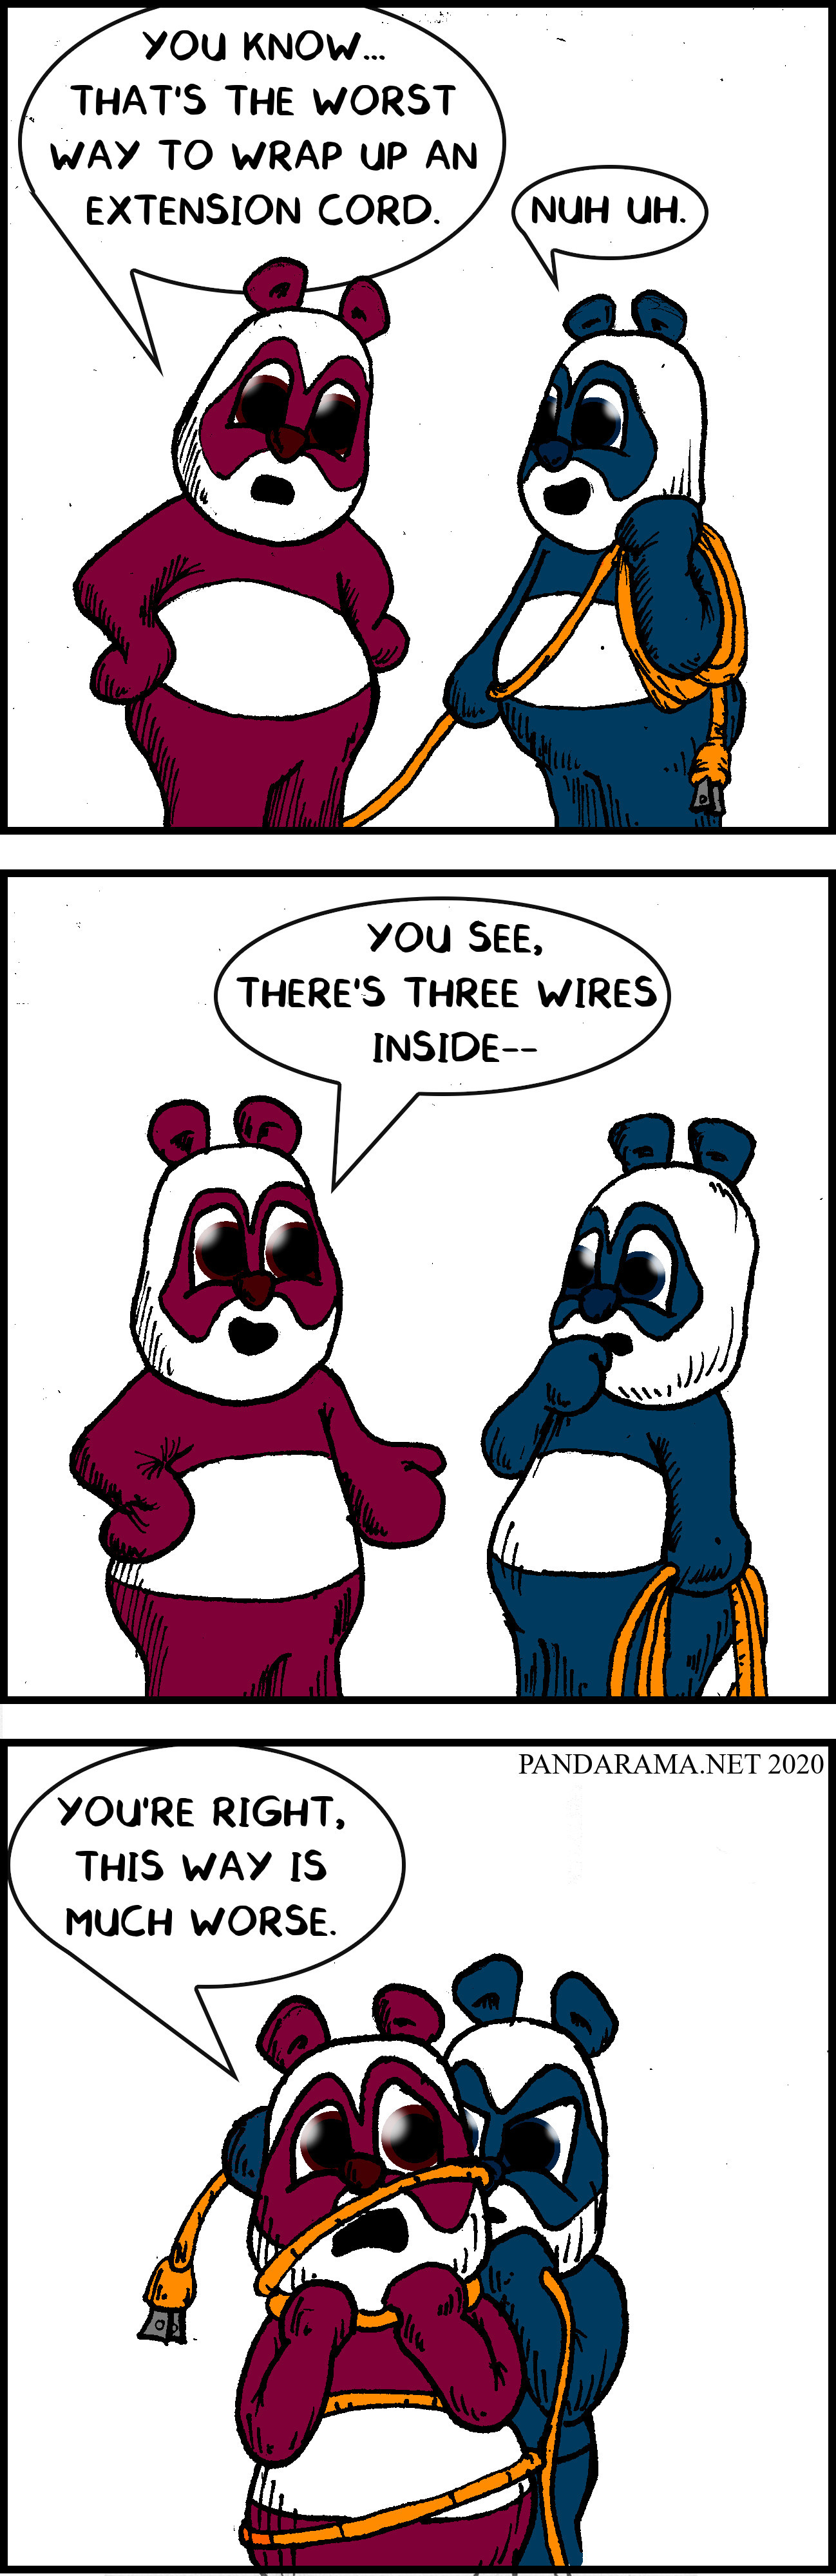 webcomic panda learns that worst way to wrap an extension cord is around the neck.